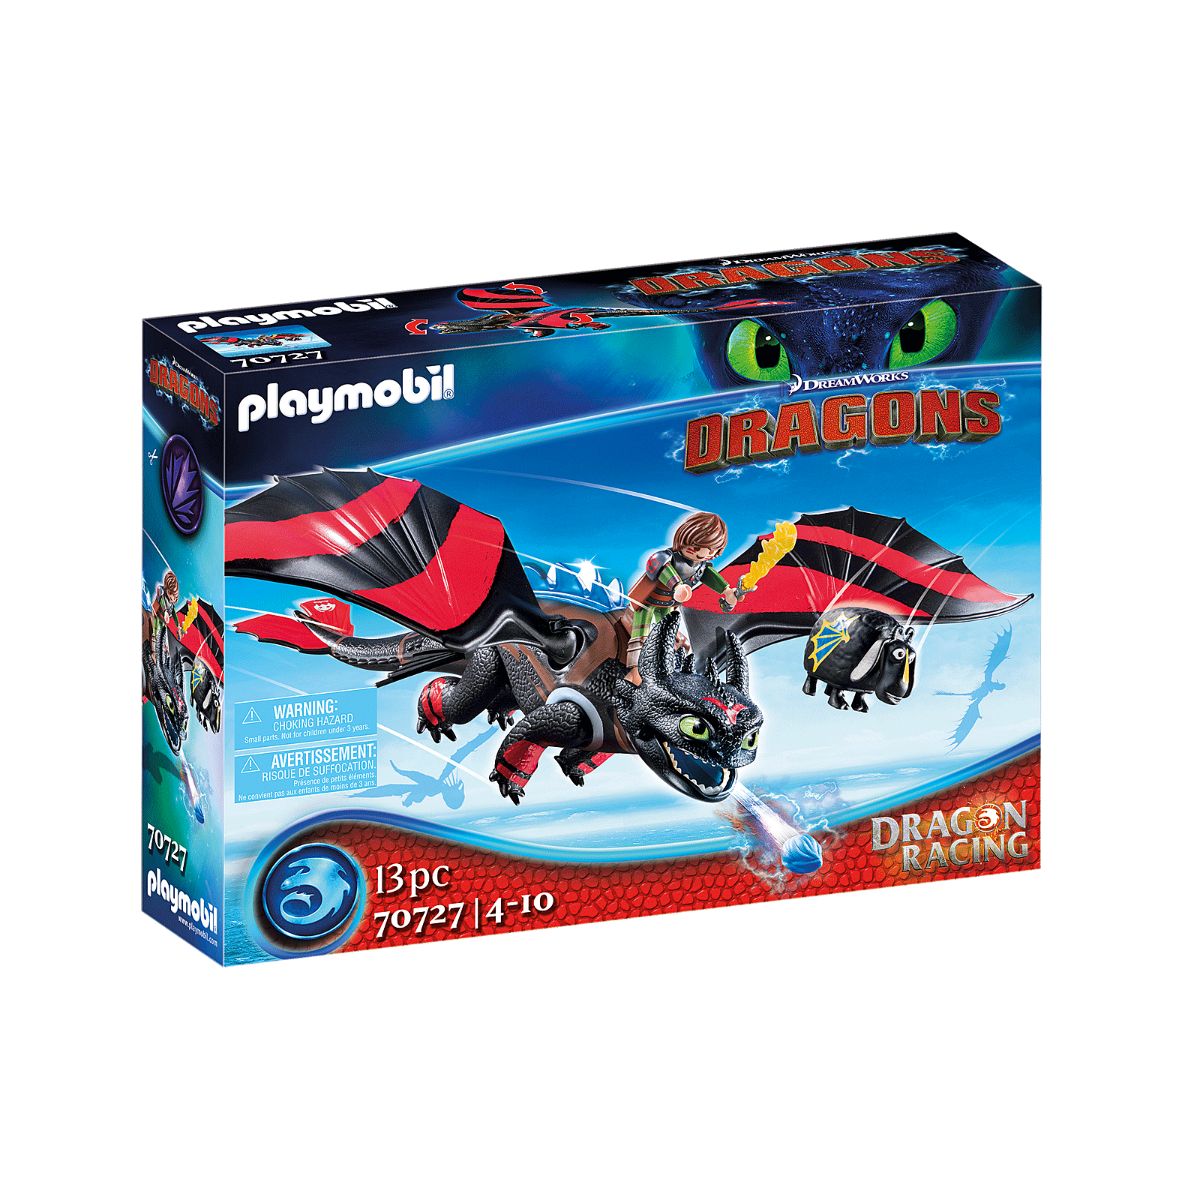 Set Playmobil Dragons – Cursa dragonilor: Hiccup si Toothless noriel.ro